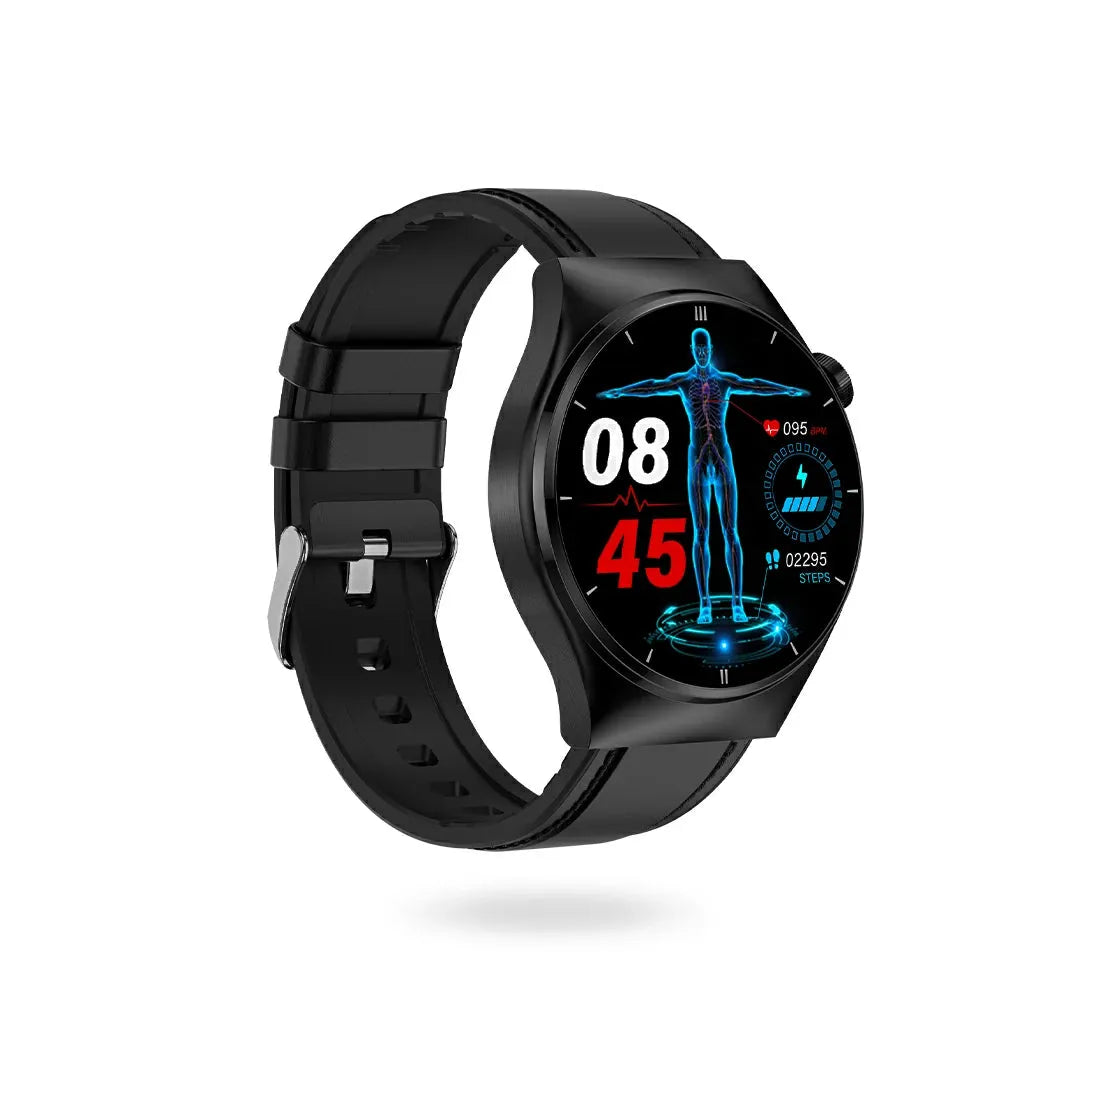 Tousains smartwatch H1 with black leather strap